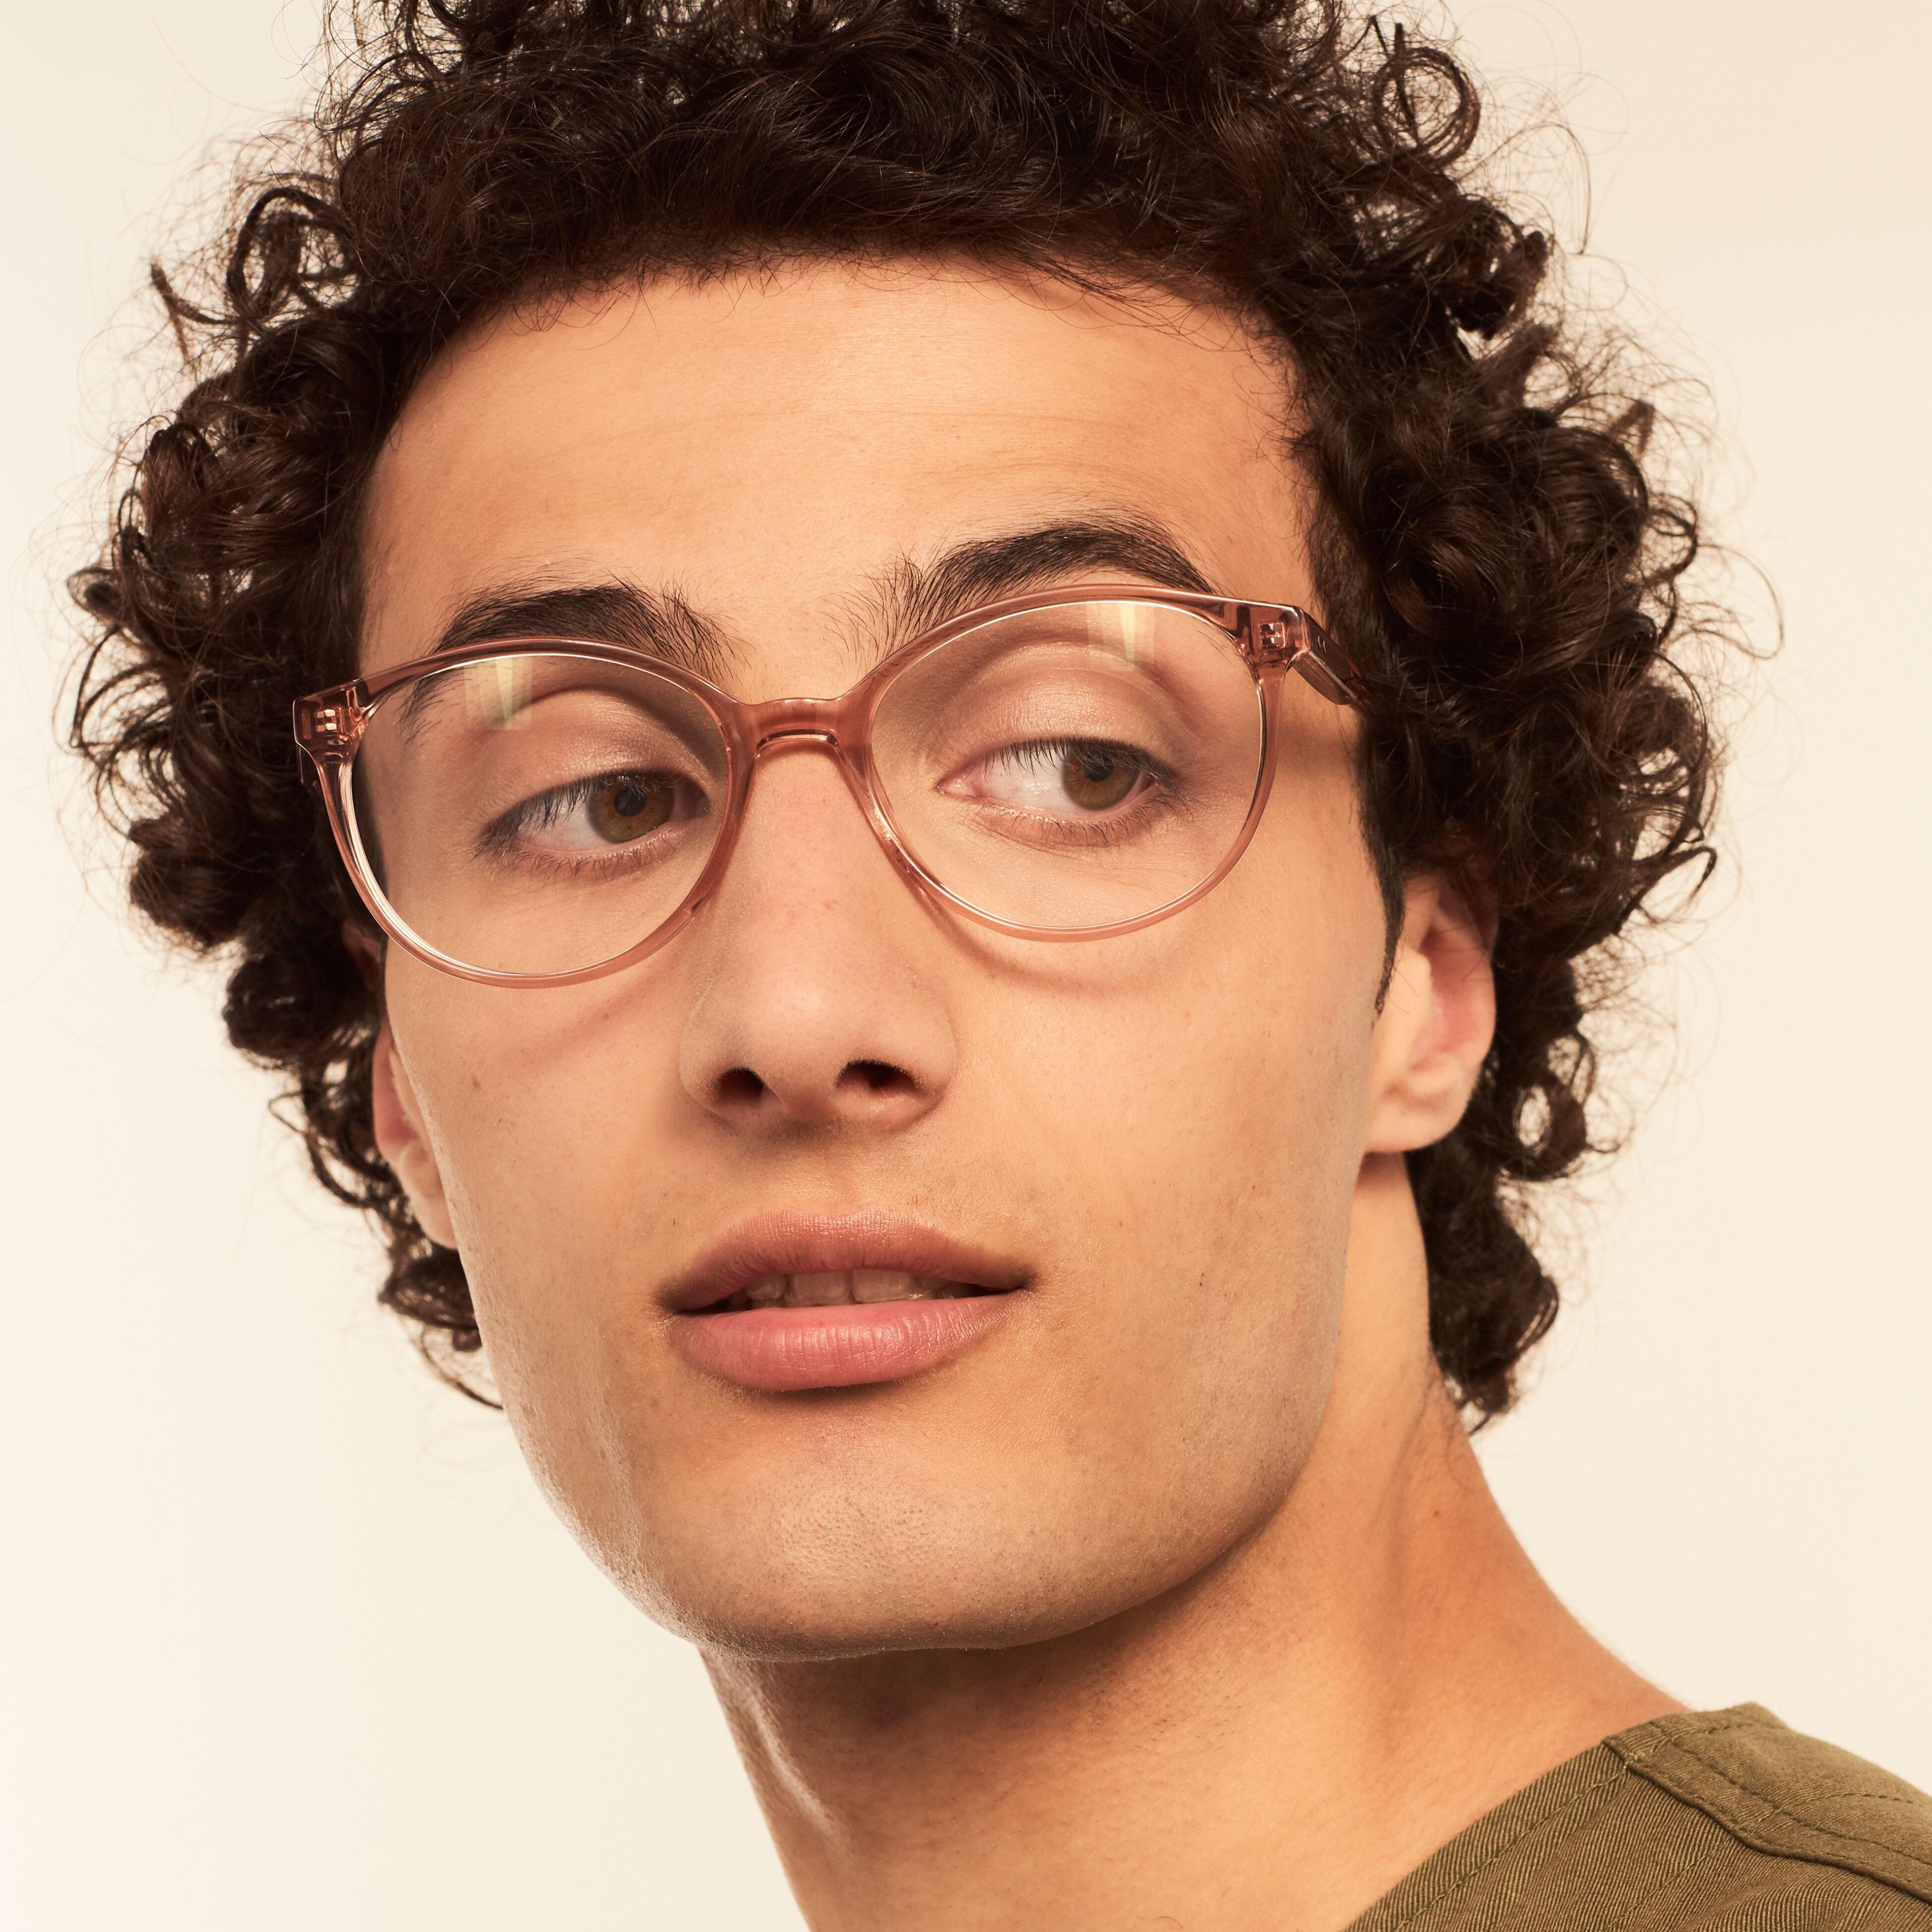 Ace & Tate Glasses | oval Acetate in Pink